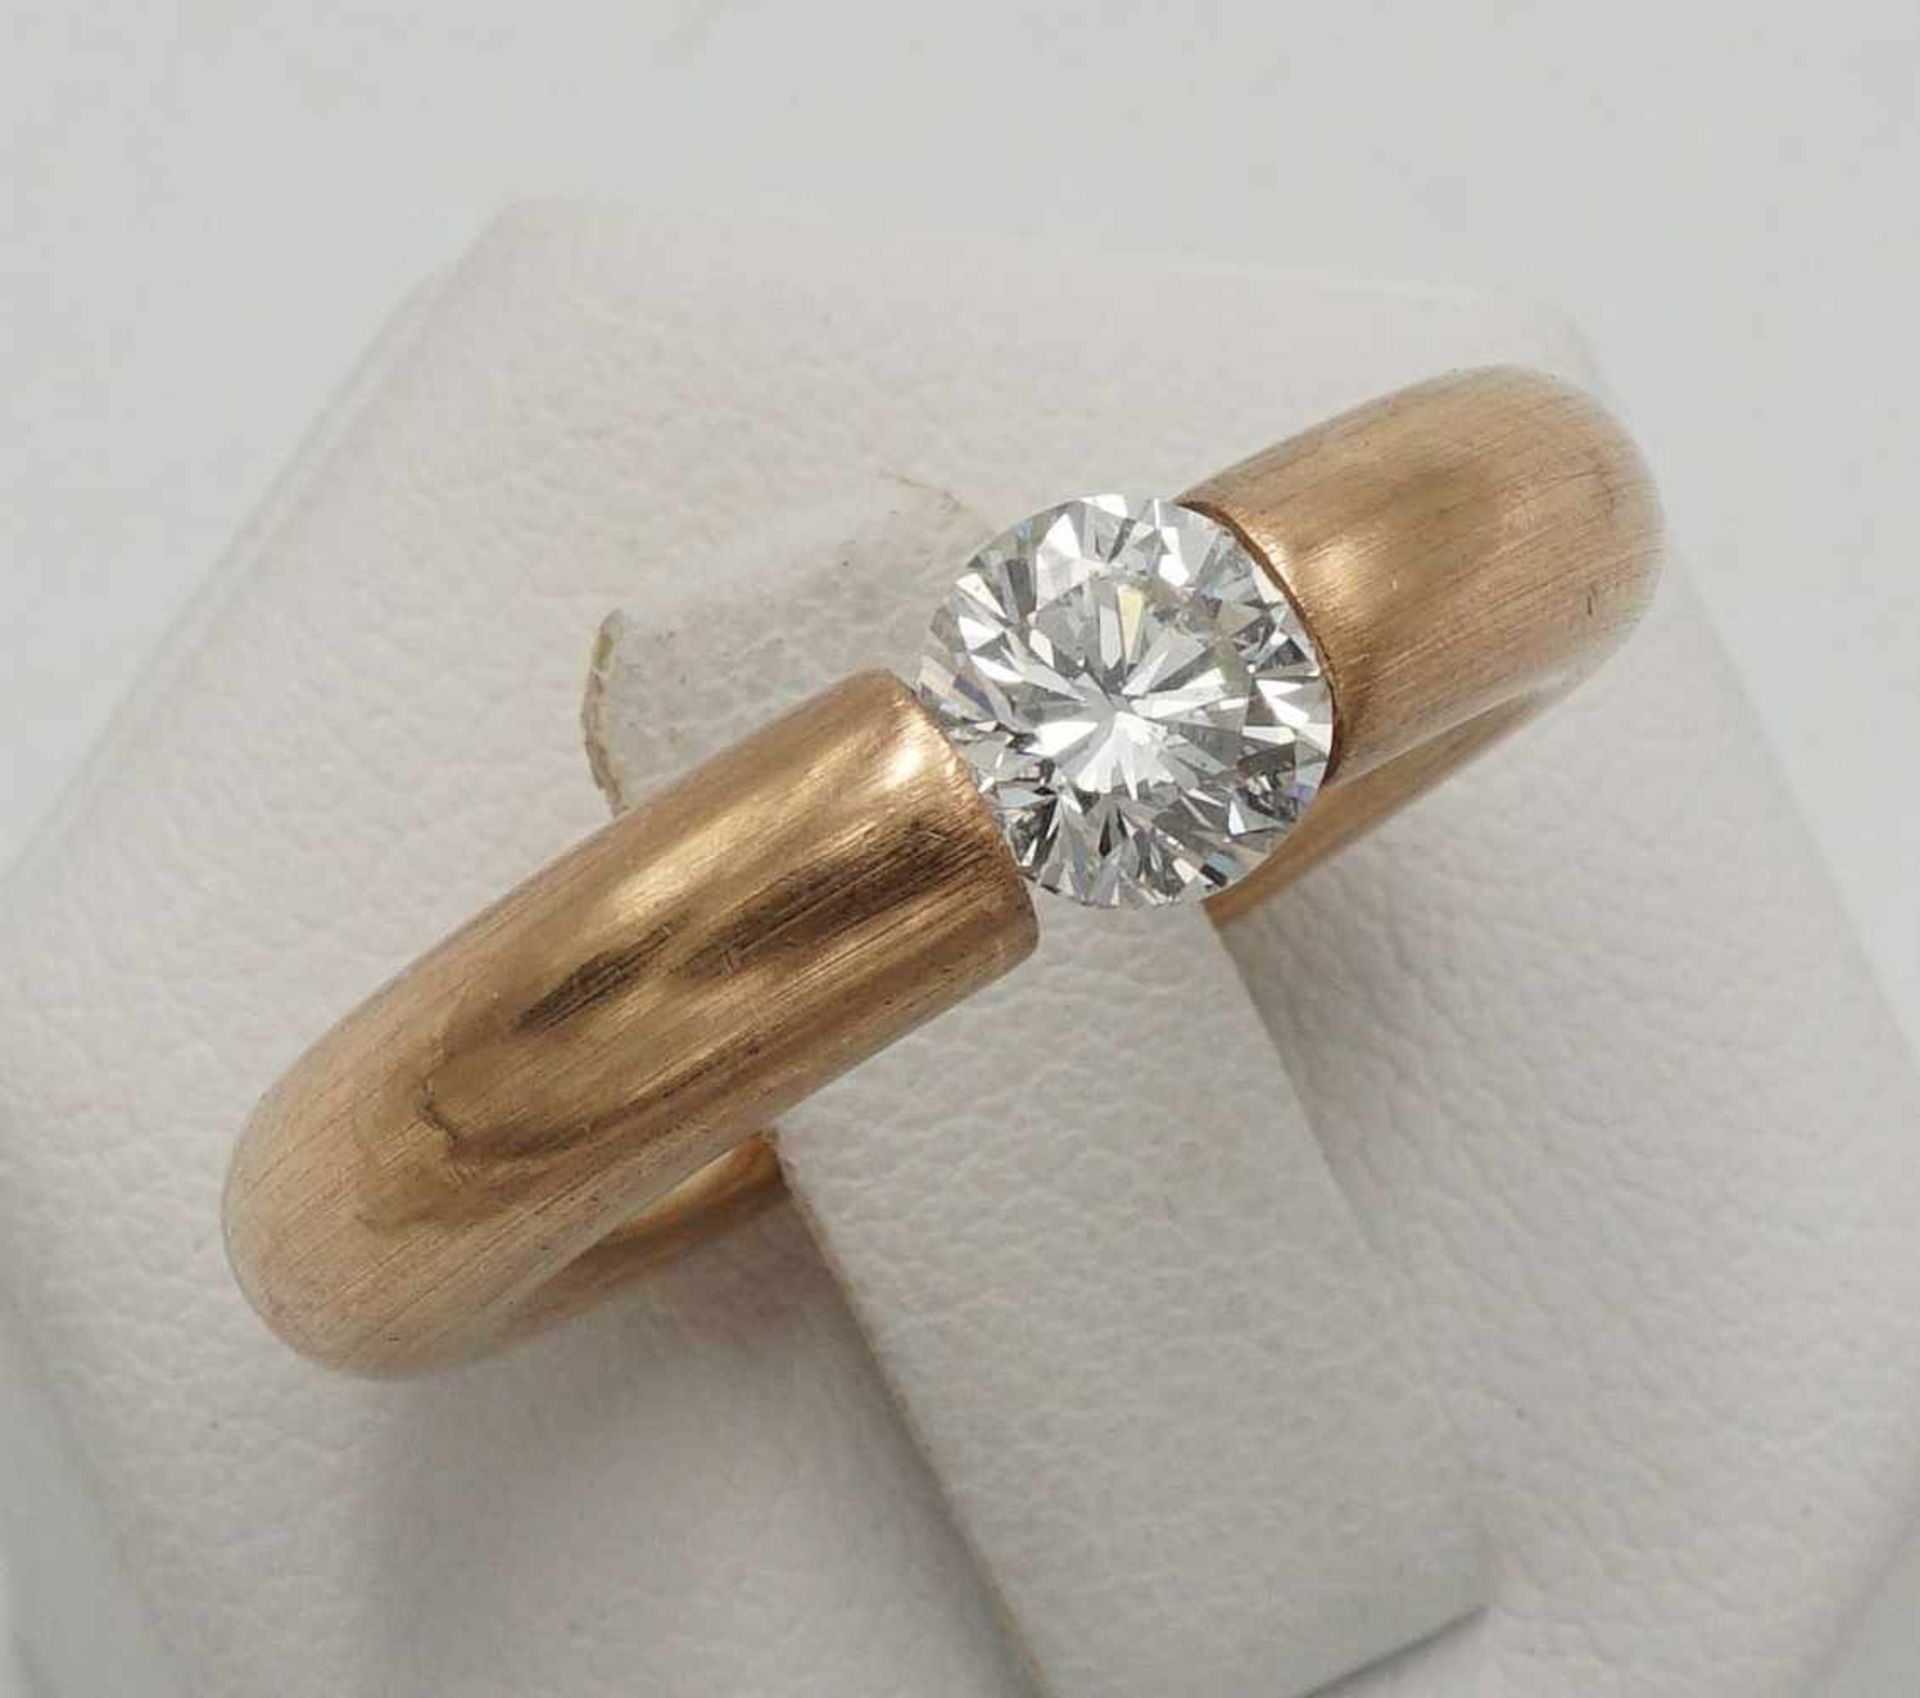 Brillantring in Rotgold2. Hälfte 20. Jh., 750/- Rotgold, ein 0,9 ct Brillant (TW/SI)